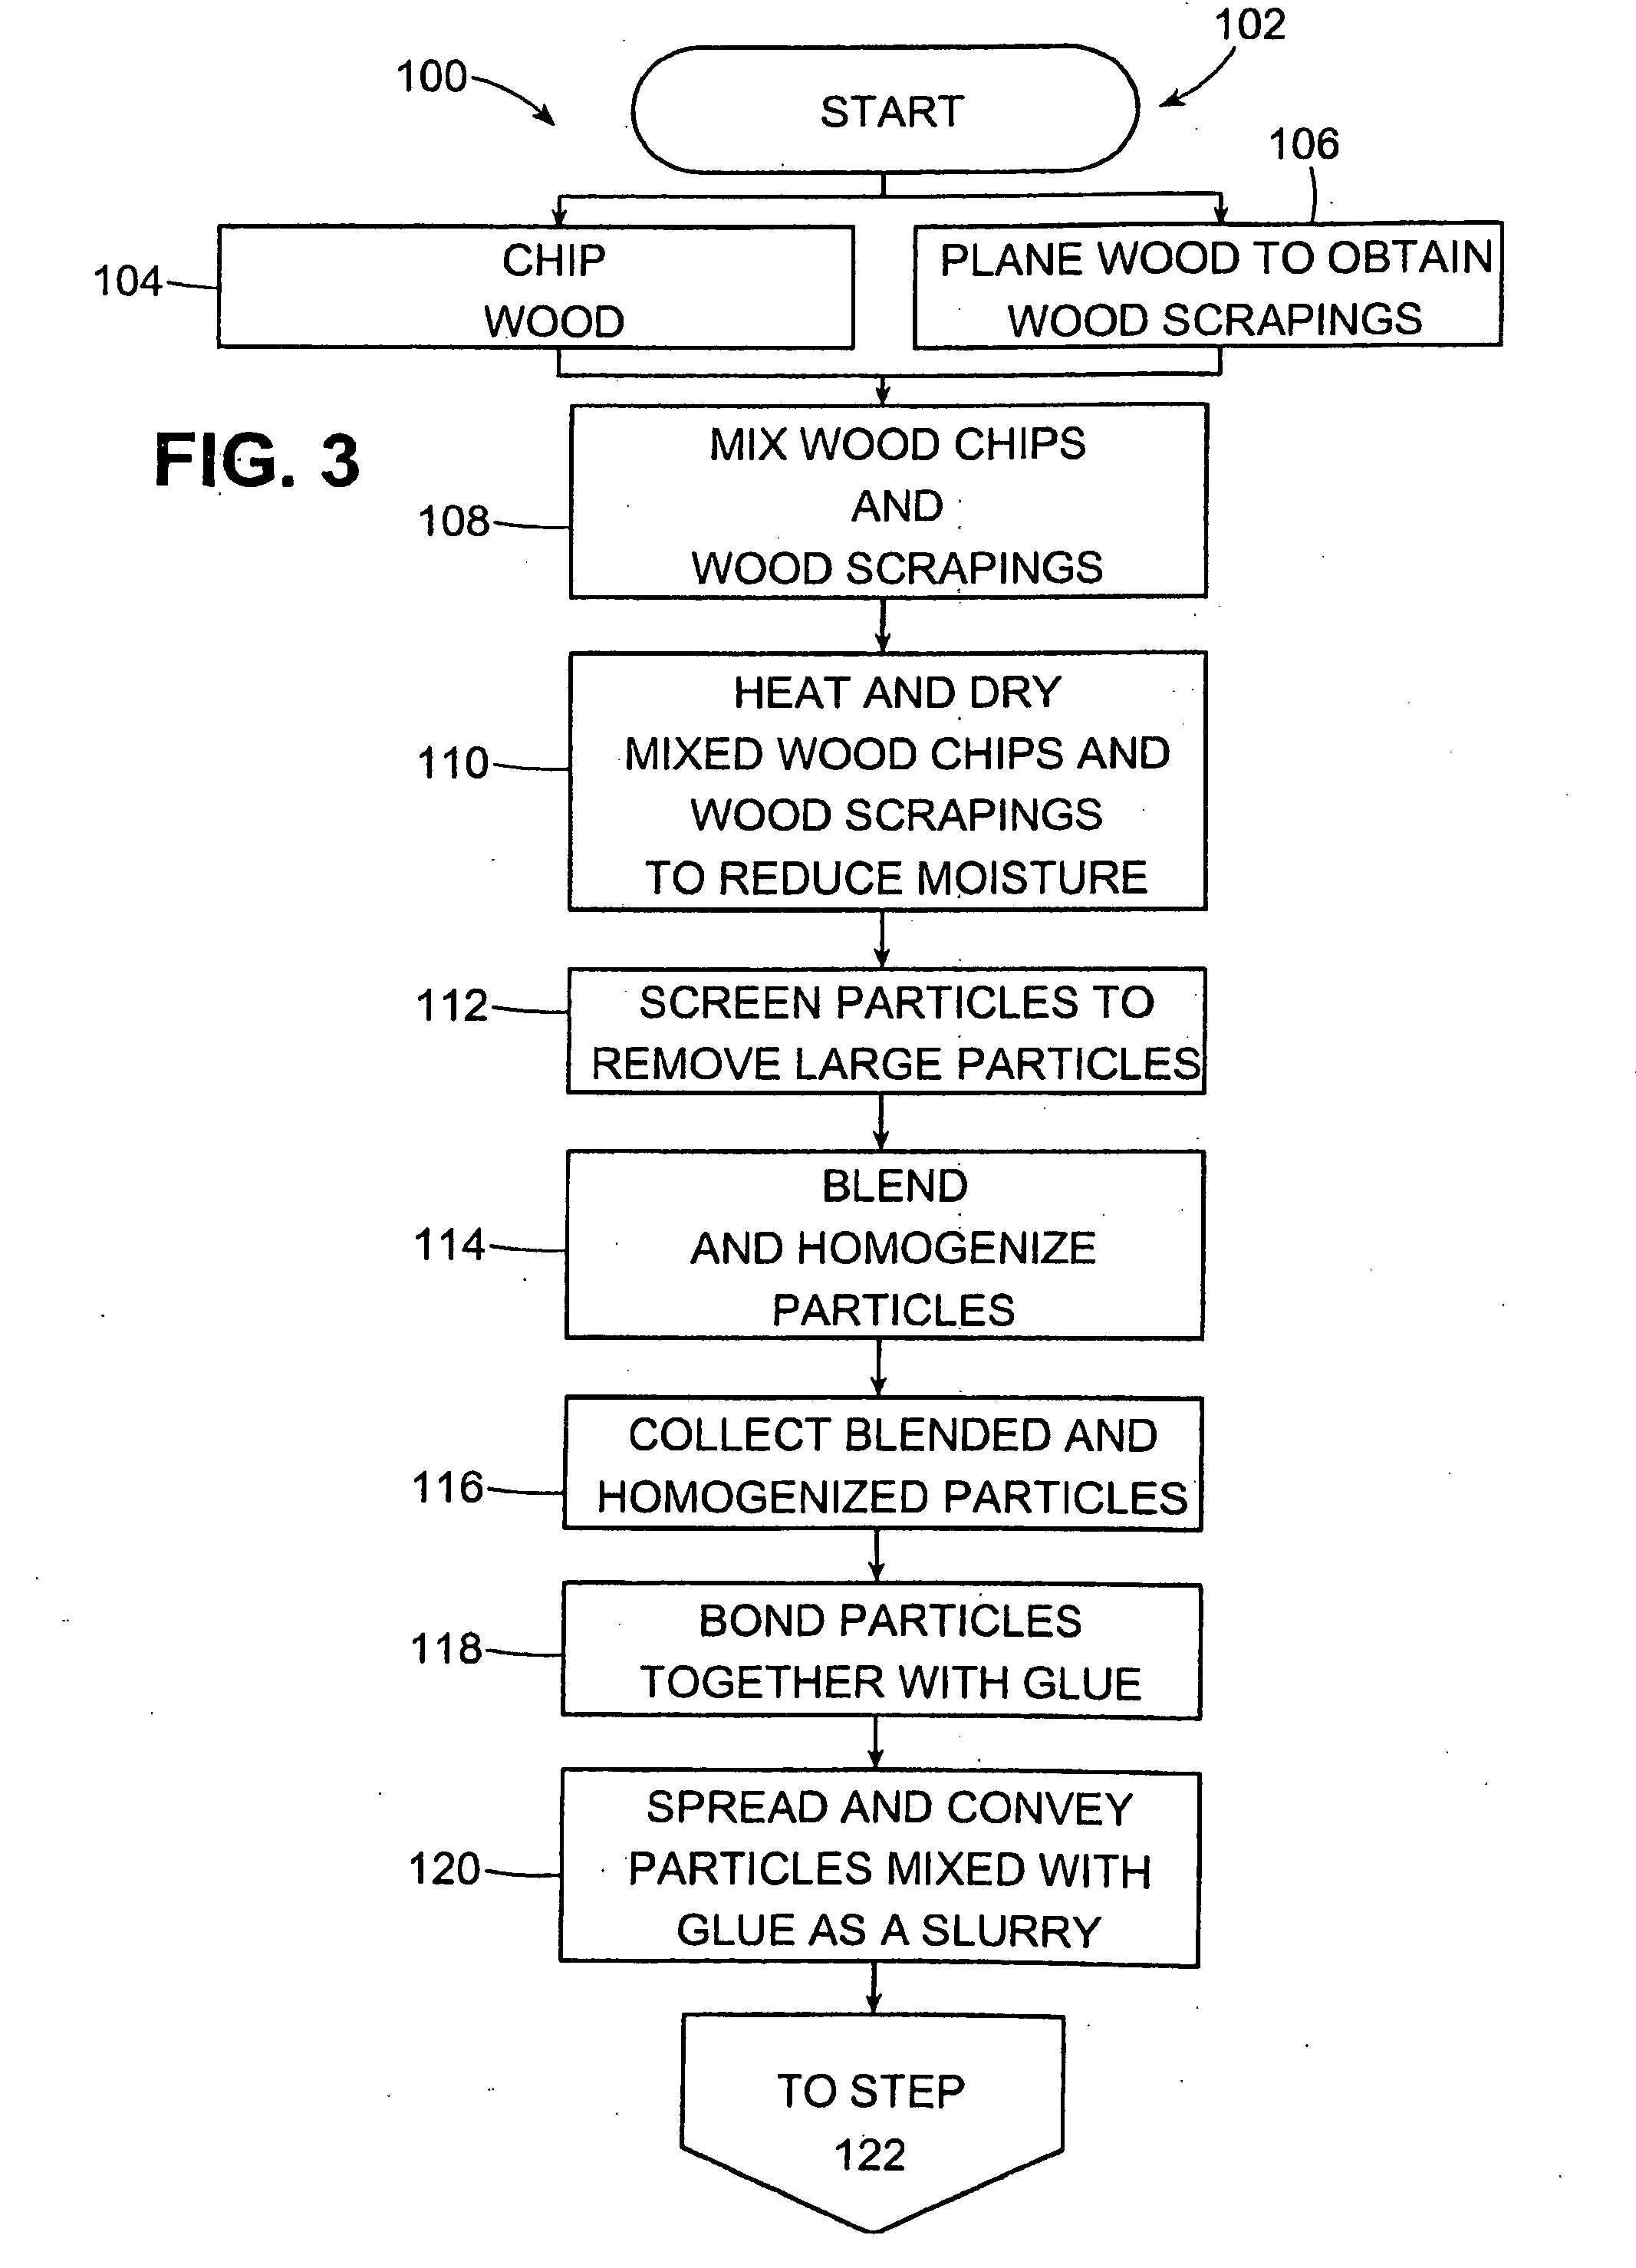 Laminate manufacturing system, method, and article of manufacture